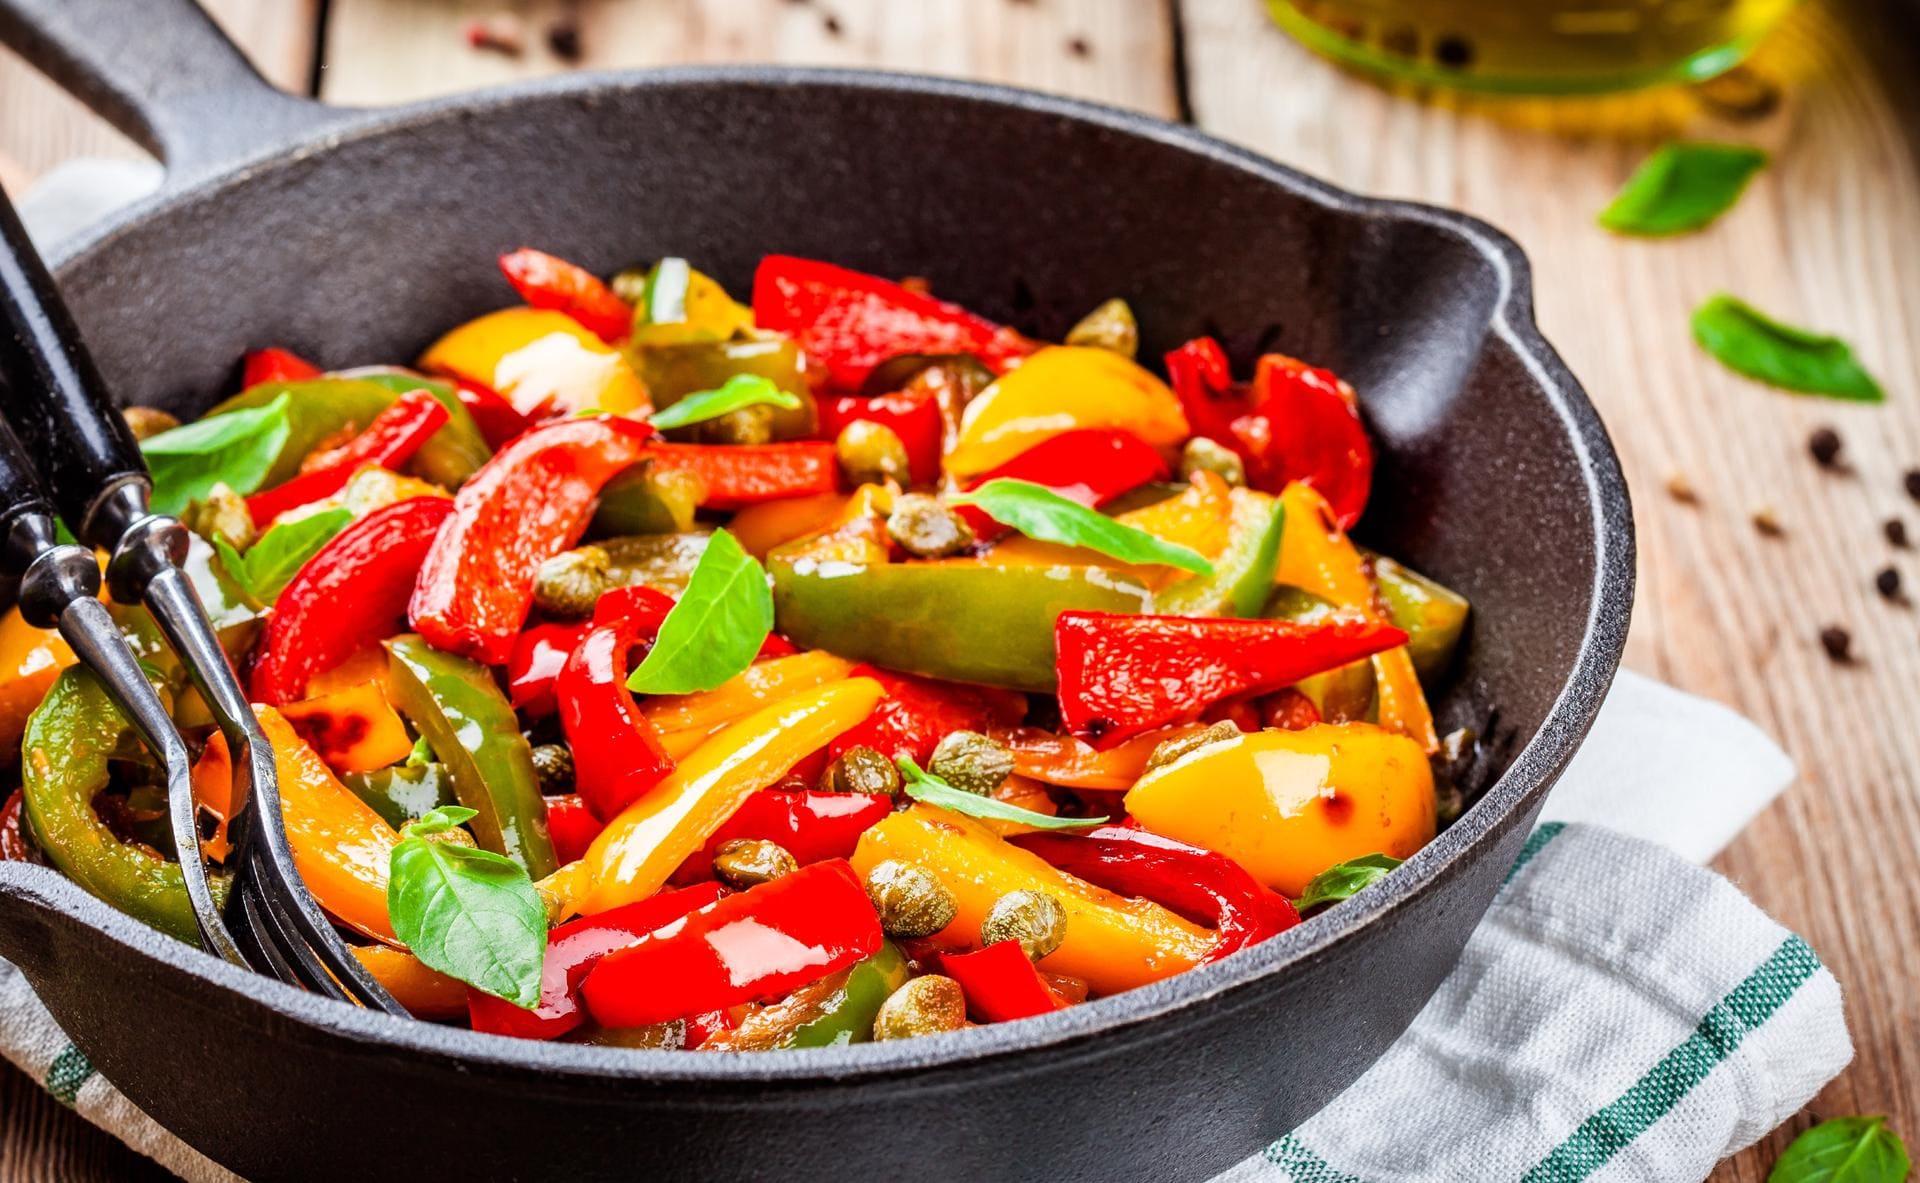 Piperade Stir Fry – A French Twist For Friday Night Dinner